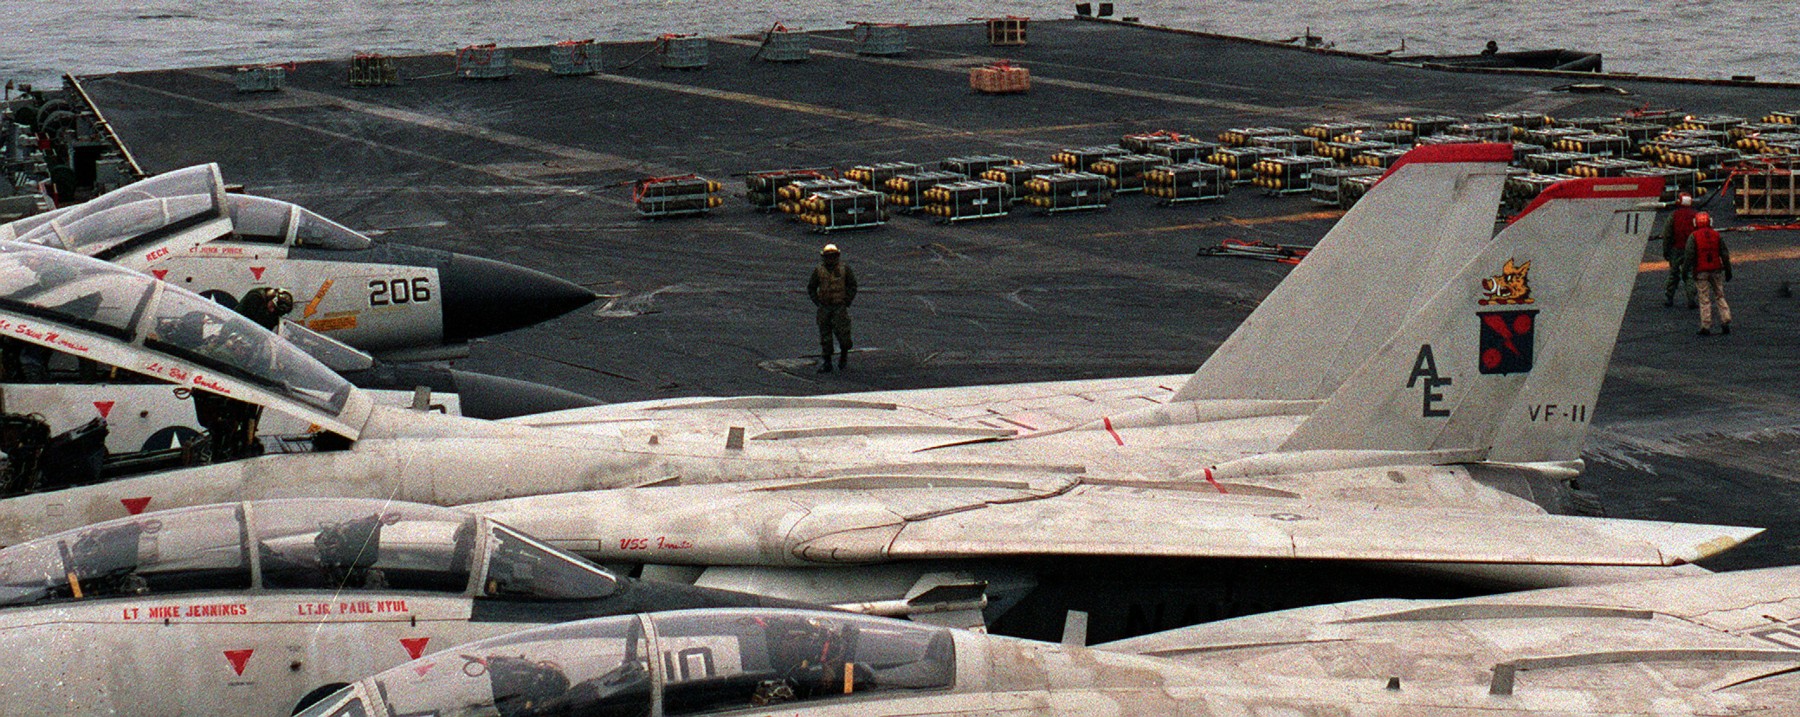 vf-11 red rippers fighter squadron us navy fitron f-14a tomcat carrier air wing cvw-6 uss forrestal cv-59 66